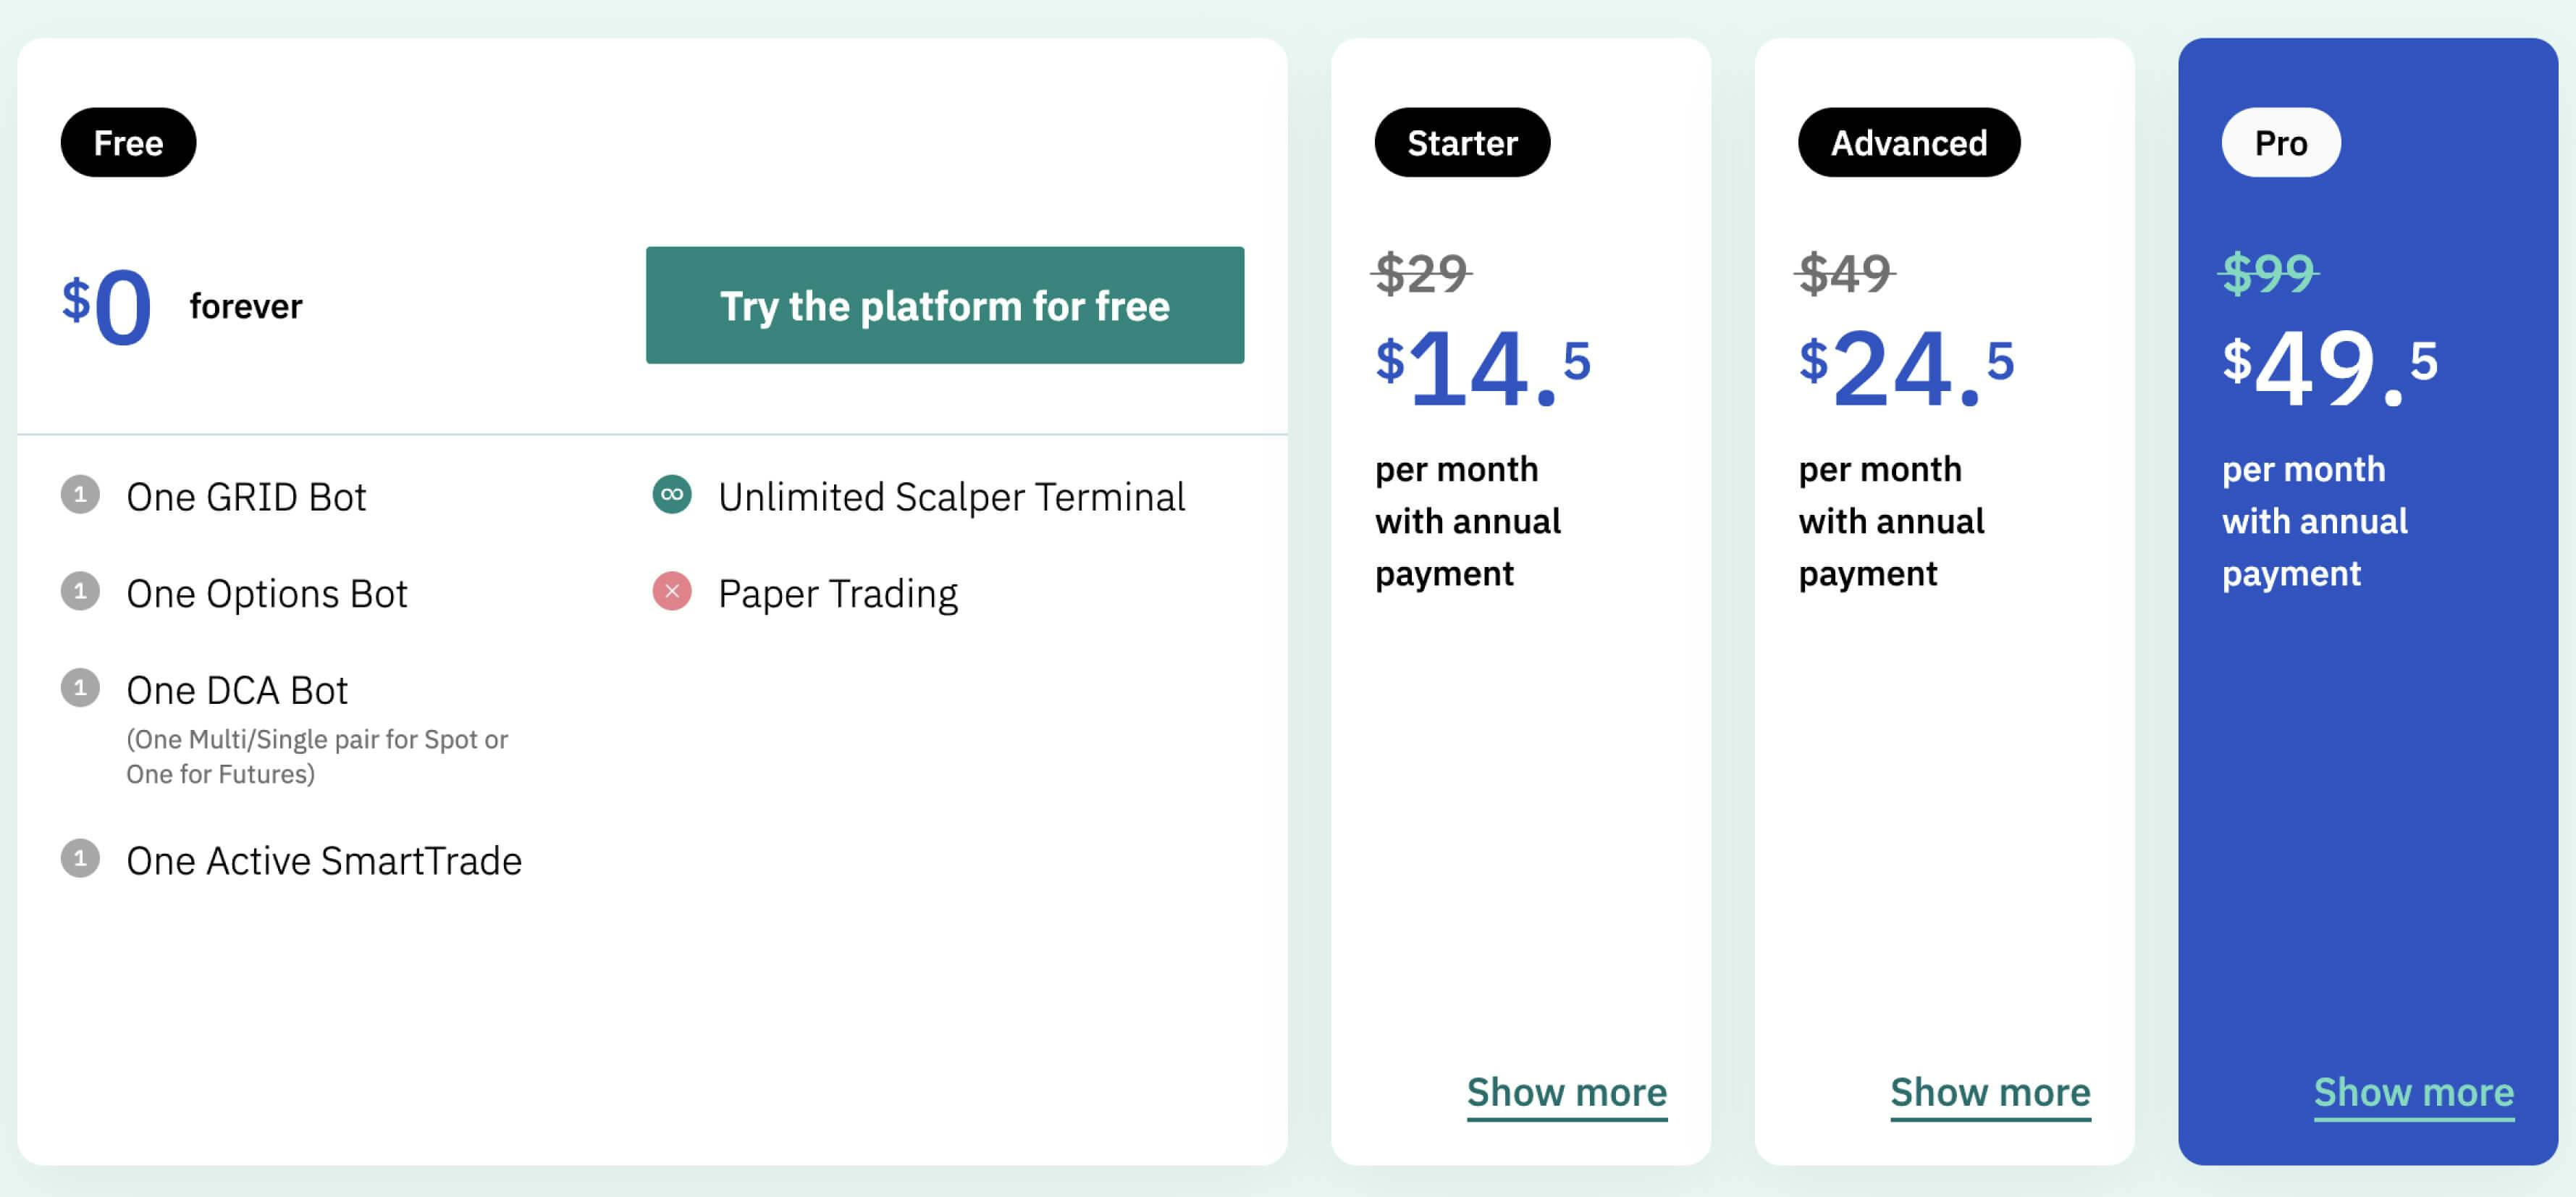 3Commas Pricing Plans